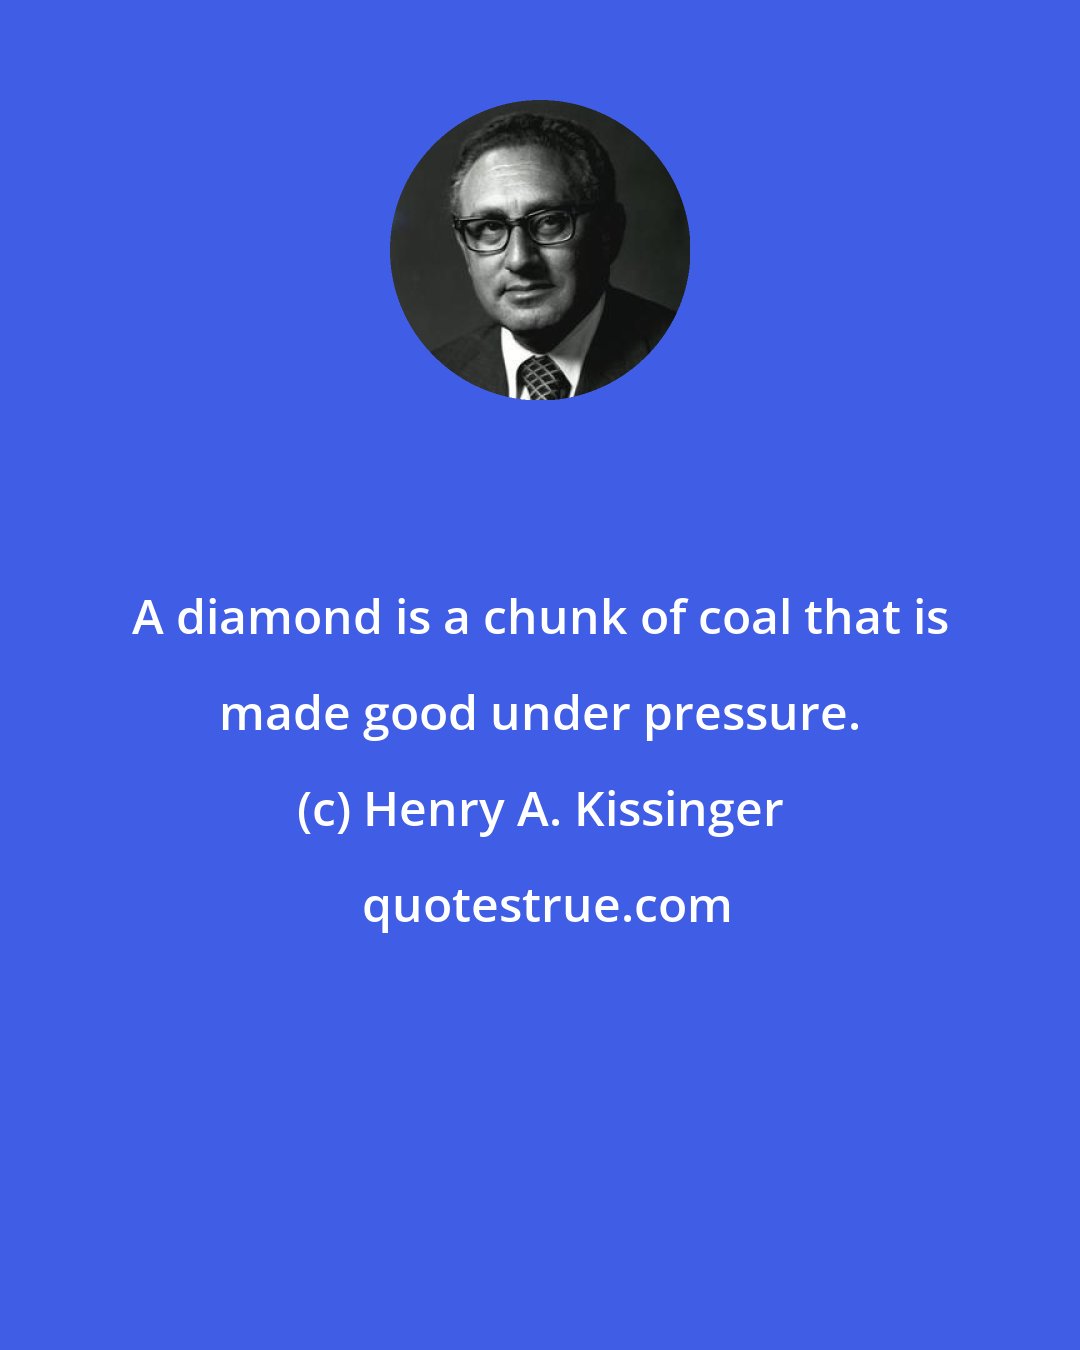 Henry A. Kissinger: A diamond is a chunk of coal that is made good under pressure.